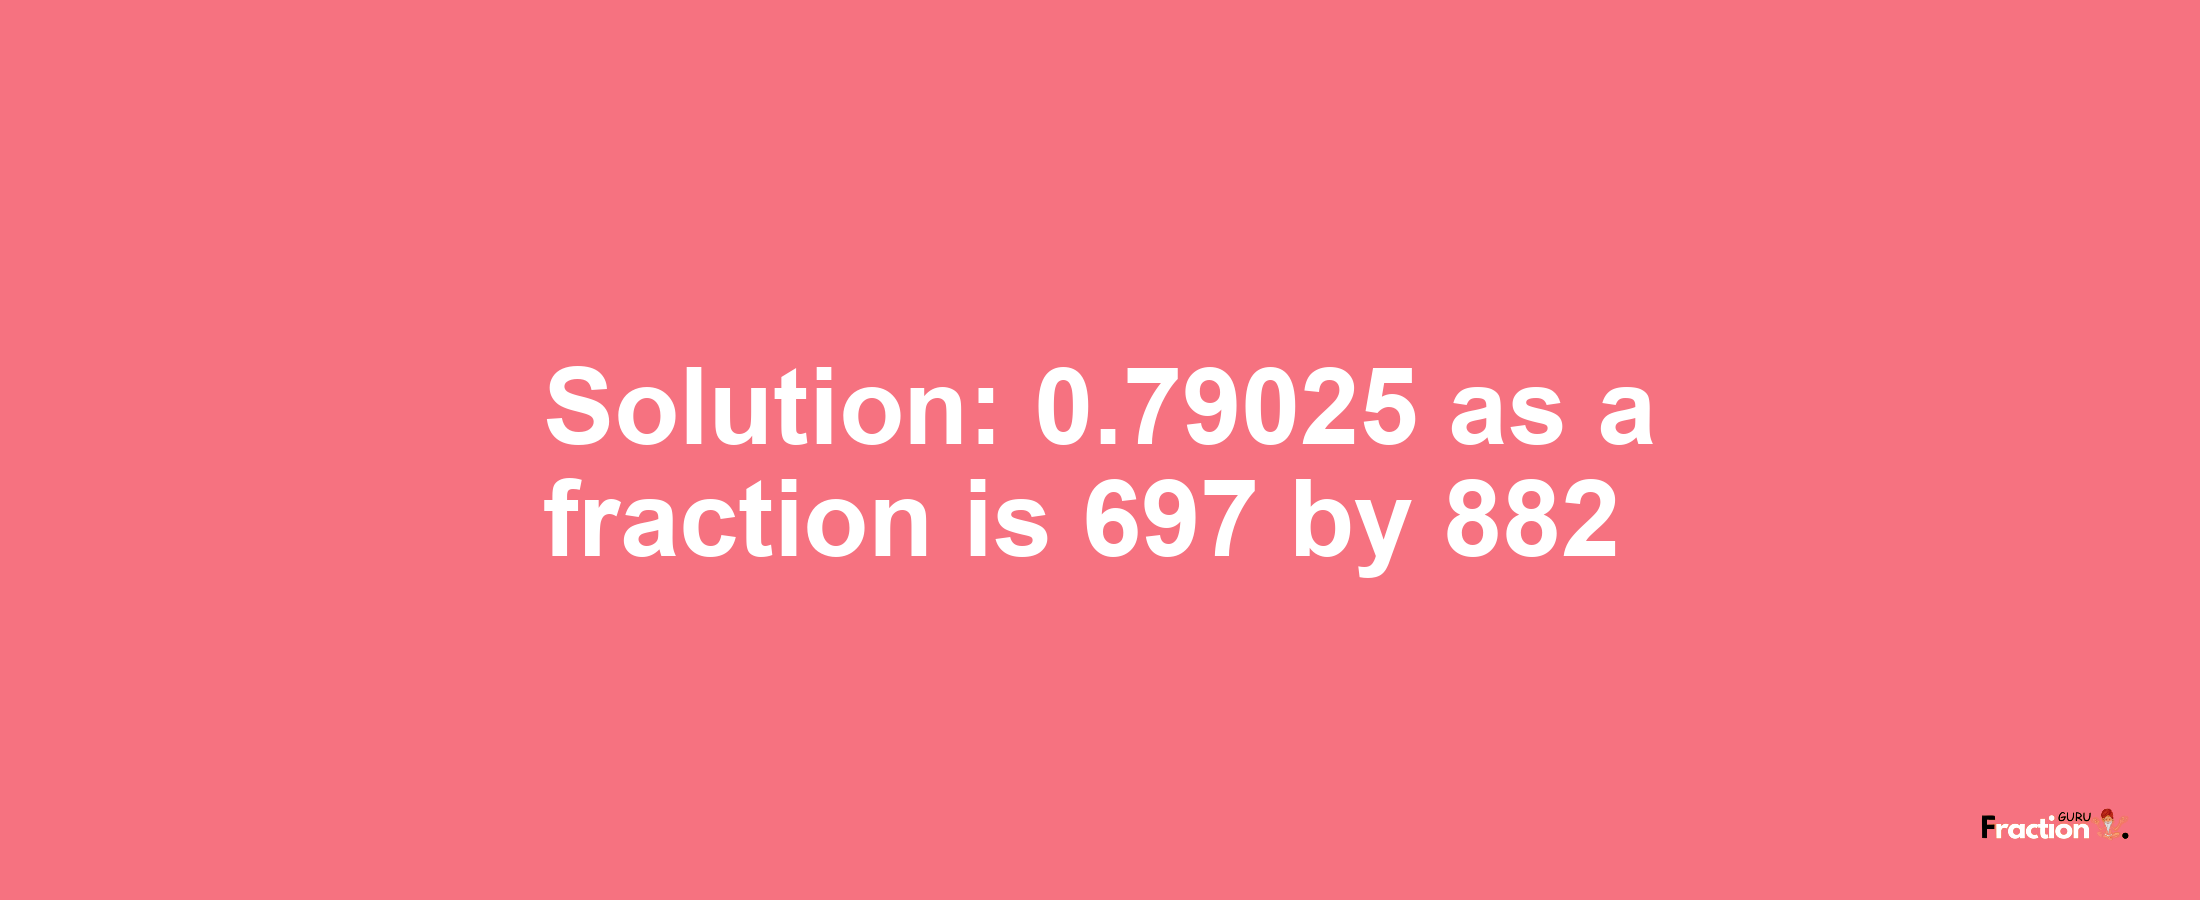 Solution:0.79025 as a fraction is 697/882